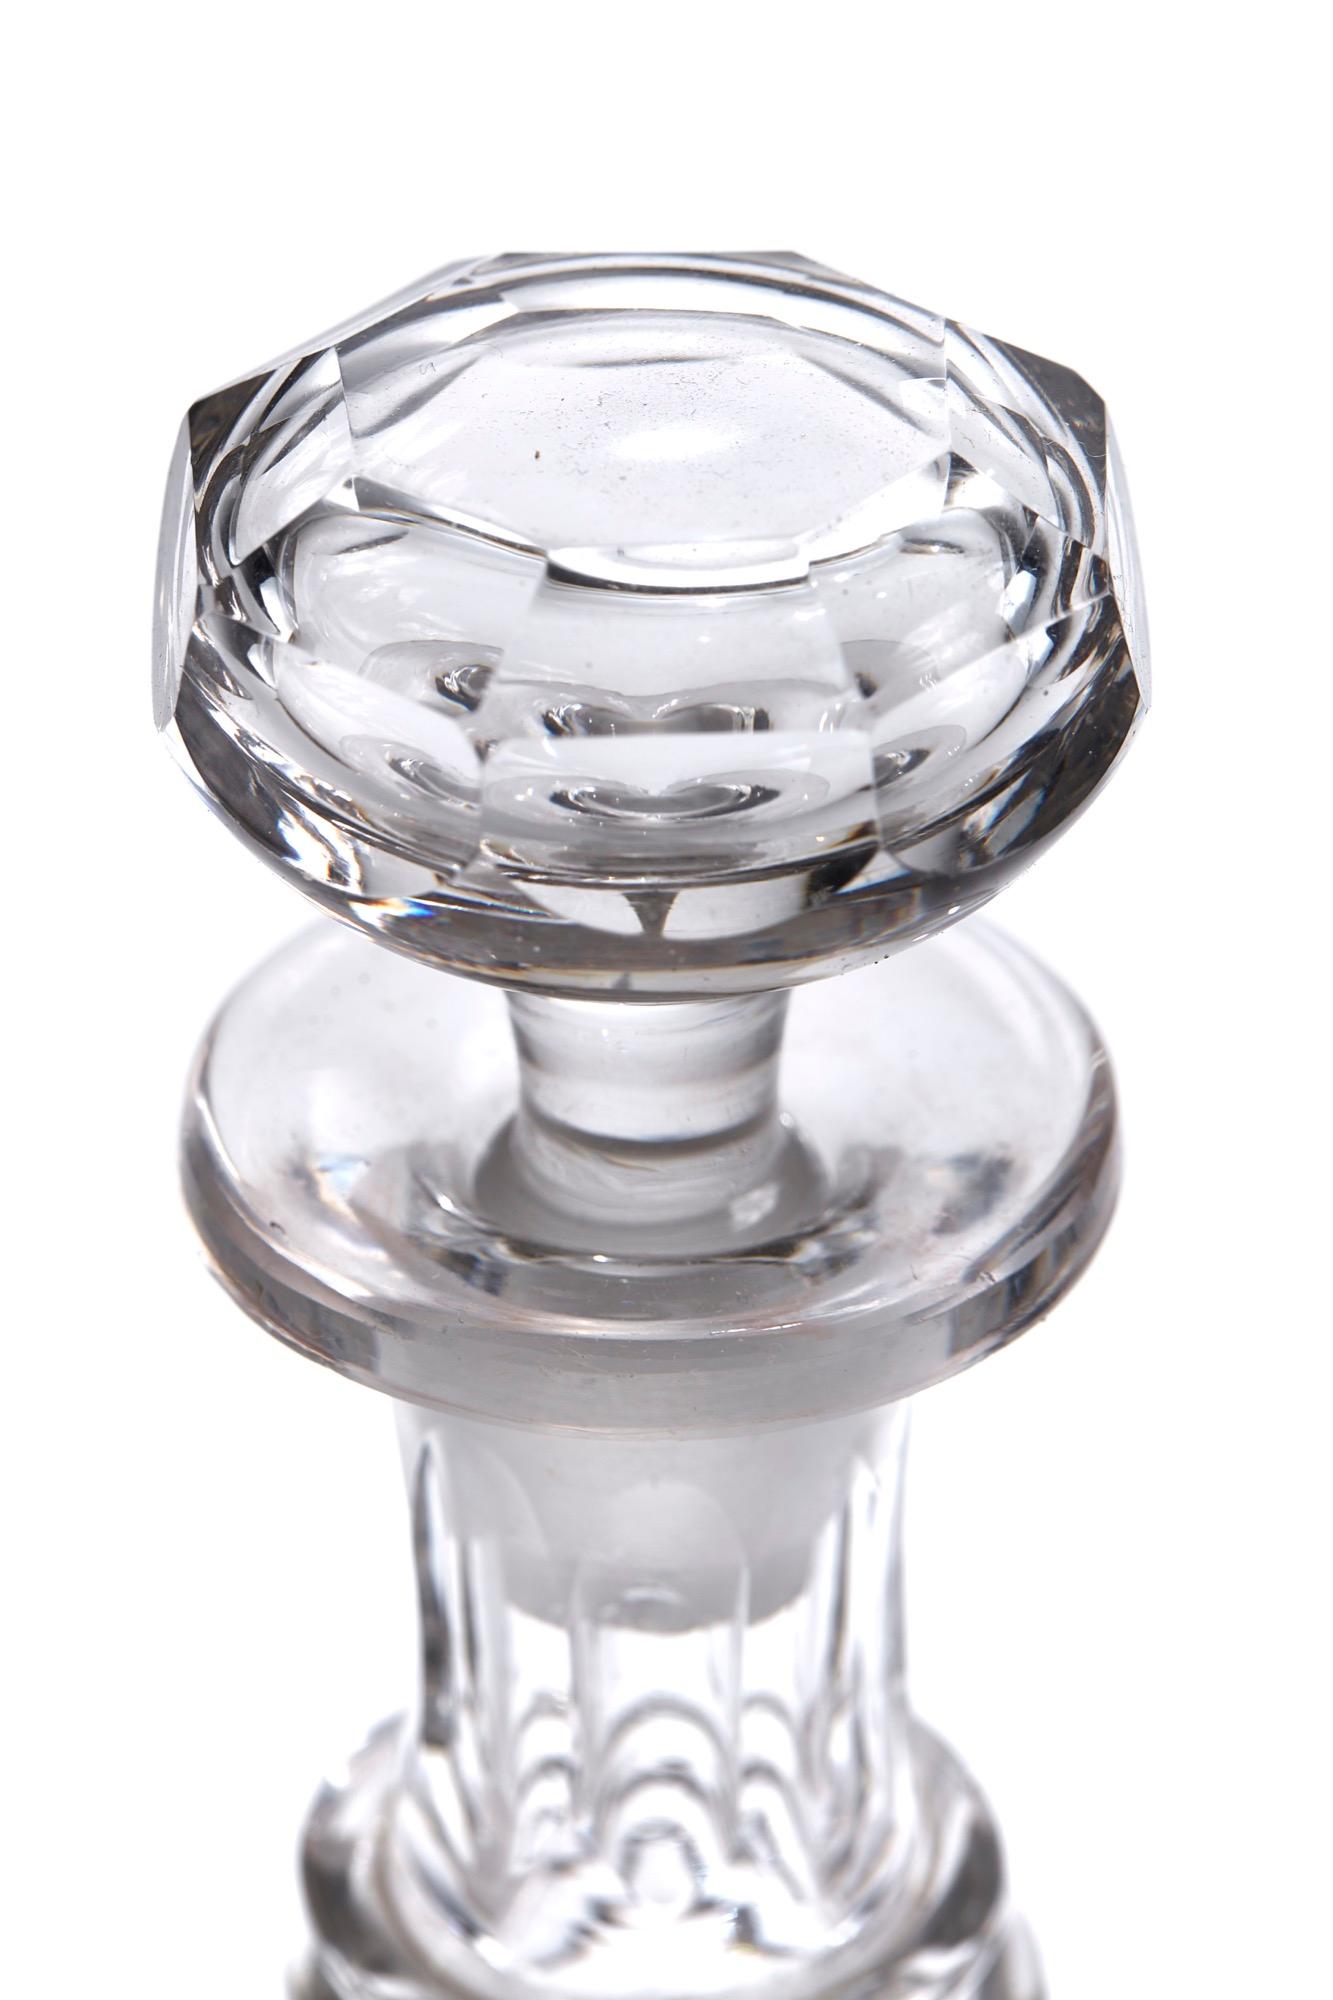 This is a 19th century antique cut glass decanter with original cut glass stopper. It is in perfect condition.